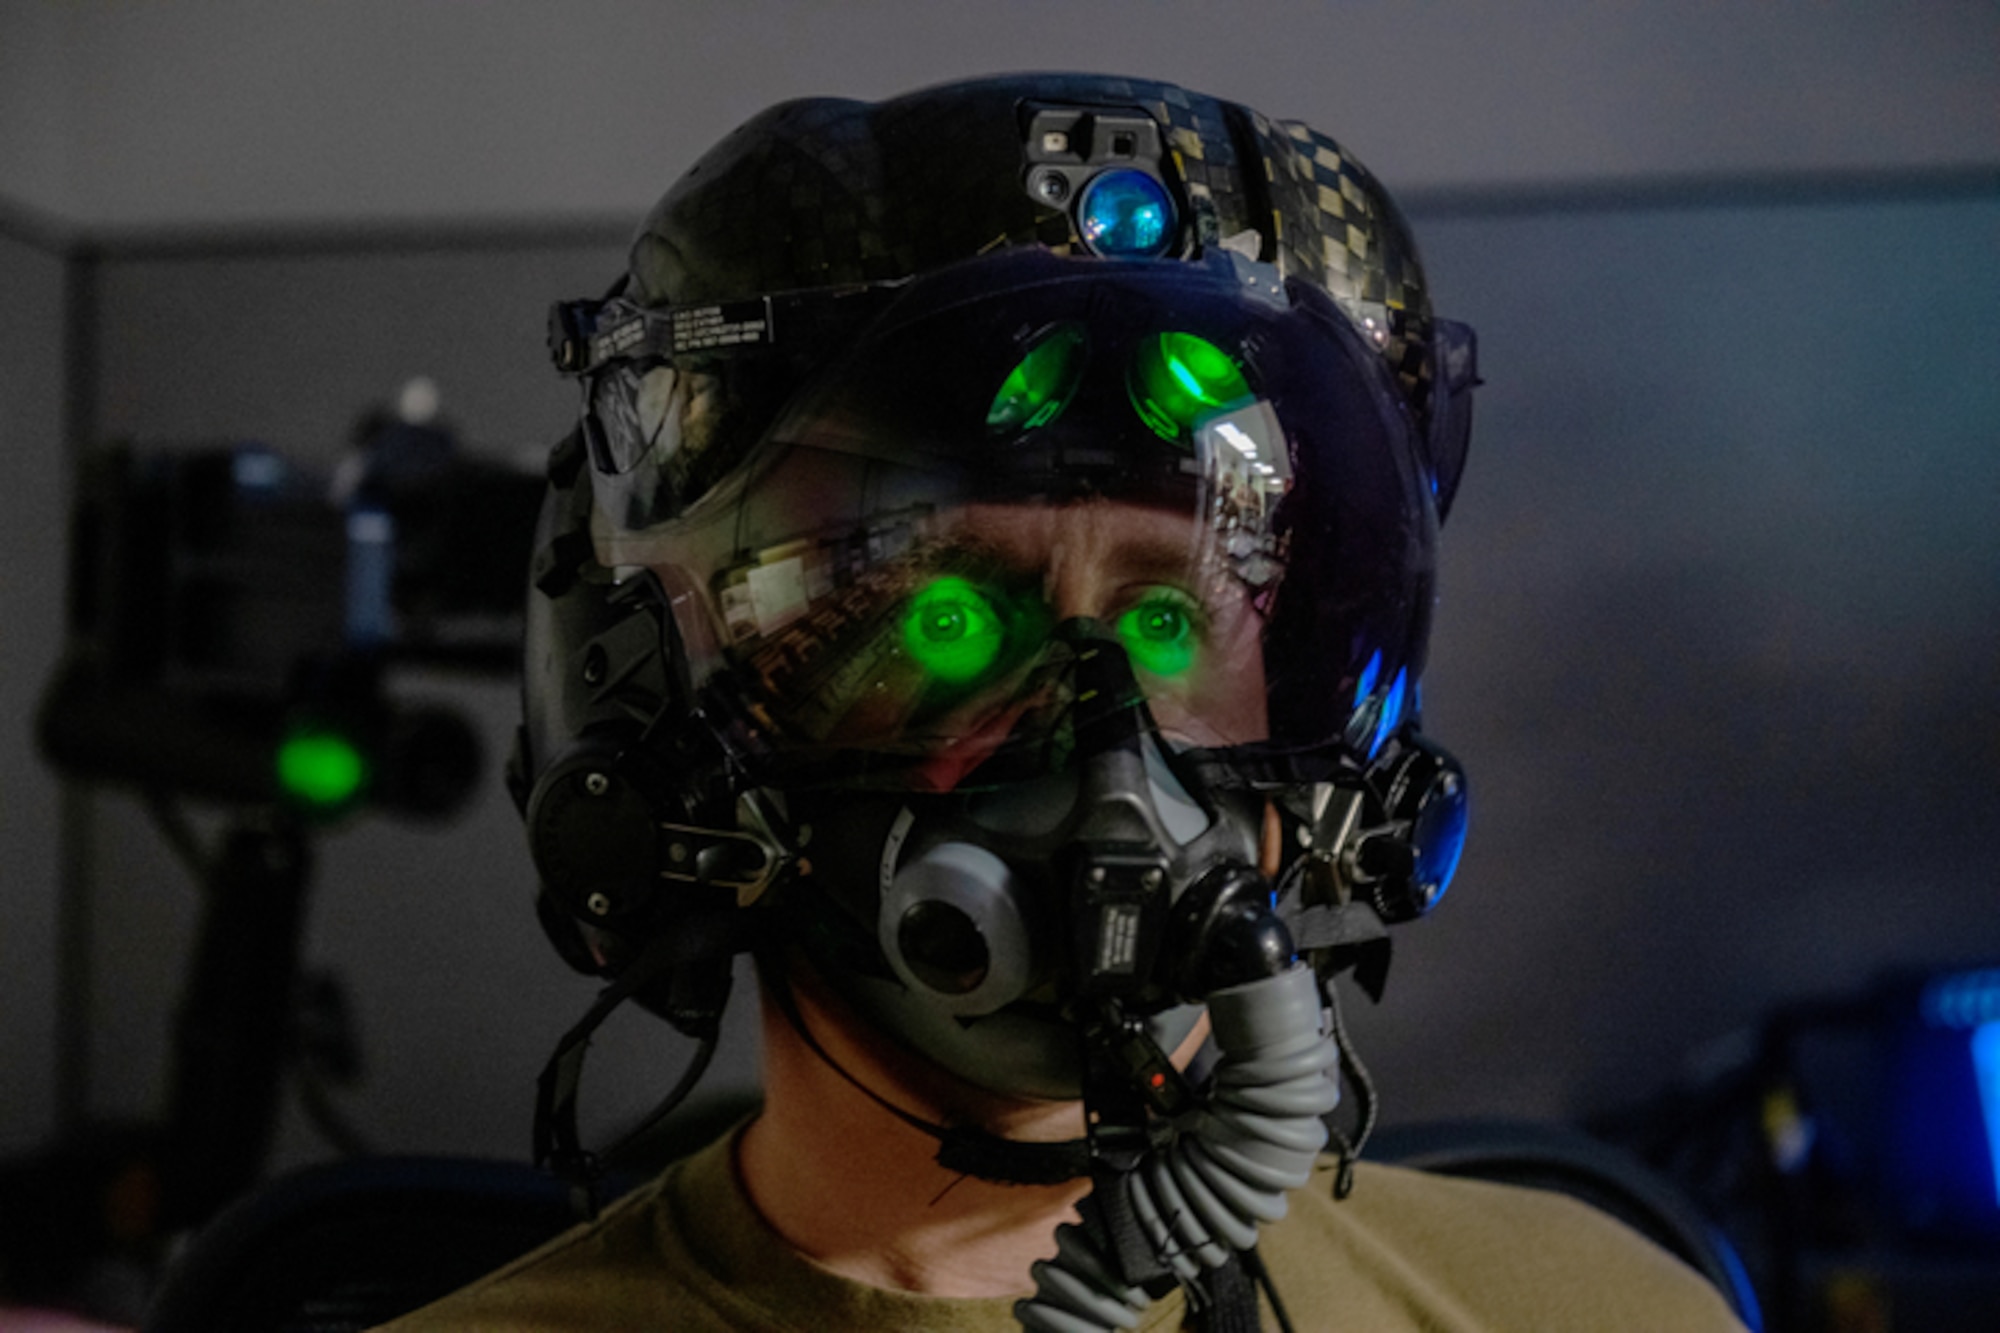 U.S. Air Force Tech. Sgt. Anthony Farnsworth, 419th Operations Support Squadron, poses for a photo to demonstrate the F-35 Generation III Helmet-Mounted Display at Hill Air Force Base, Utah, on July 10, 2021. The display provides the pilot critical information, built-in night vision, and allows a 360-degree view of the aircraft’s outside environment.